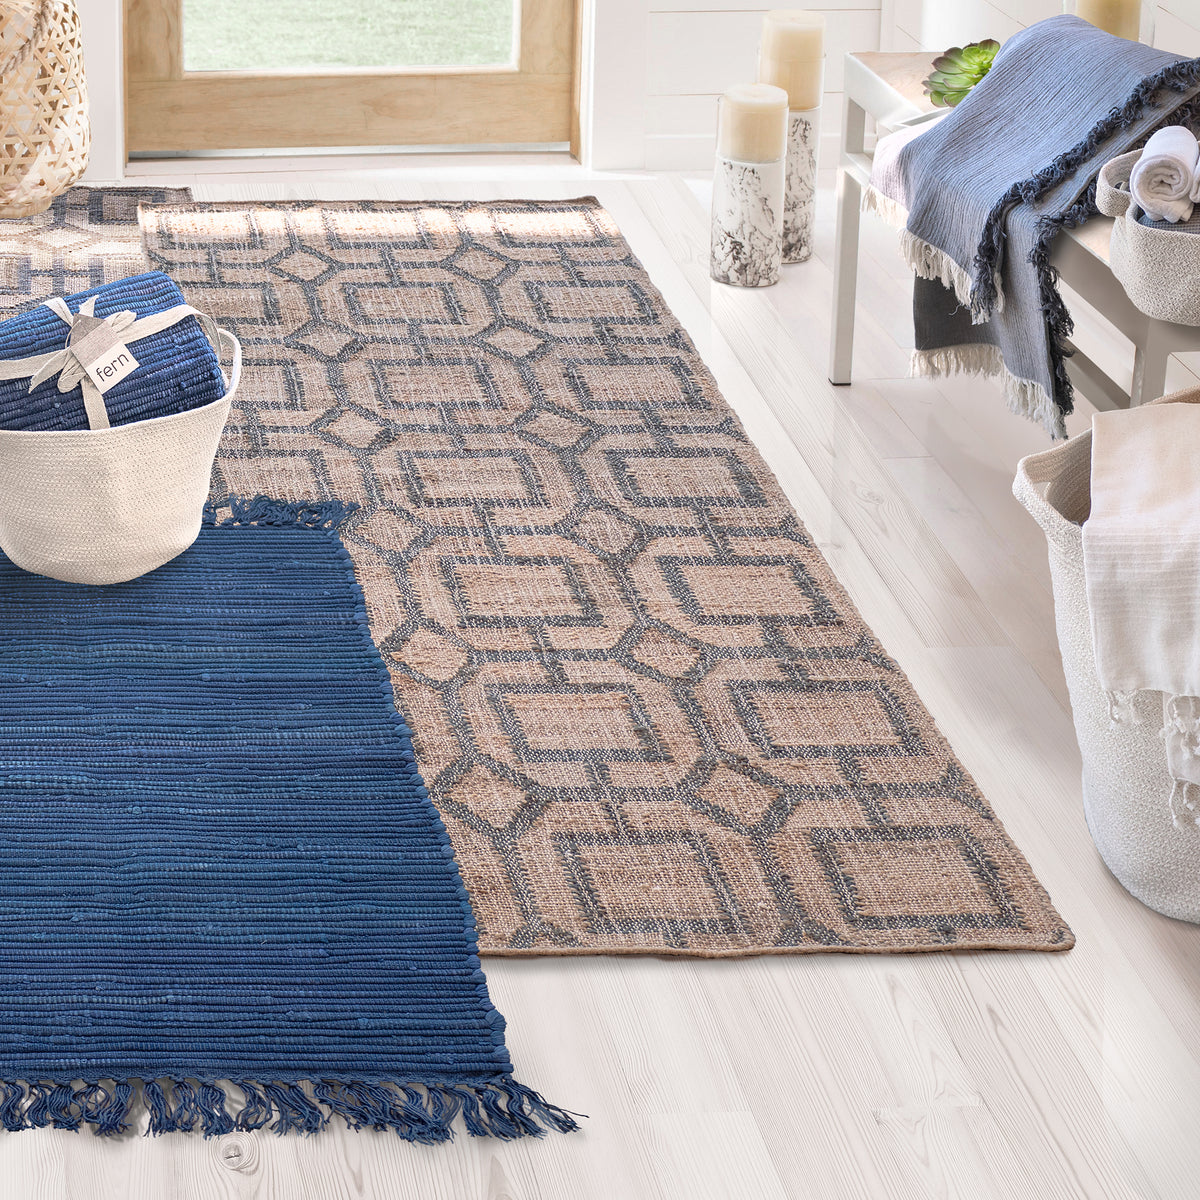 Lifestyle, showing the Fern Jute Runner leading to a doorway and the upcycled rag rug next to it for a splash of deep blue color.